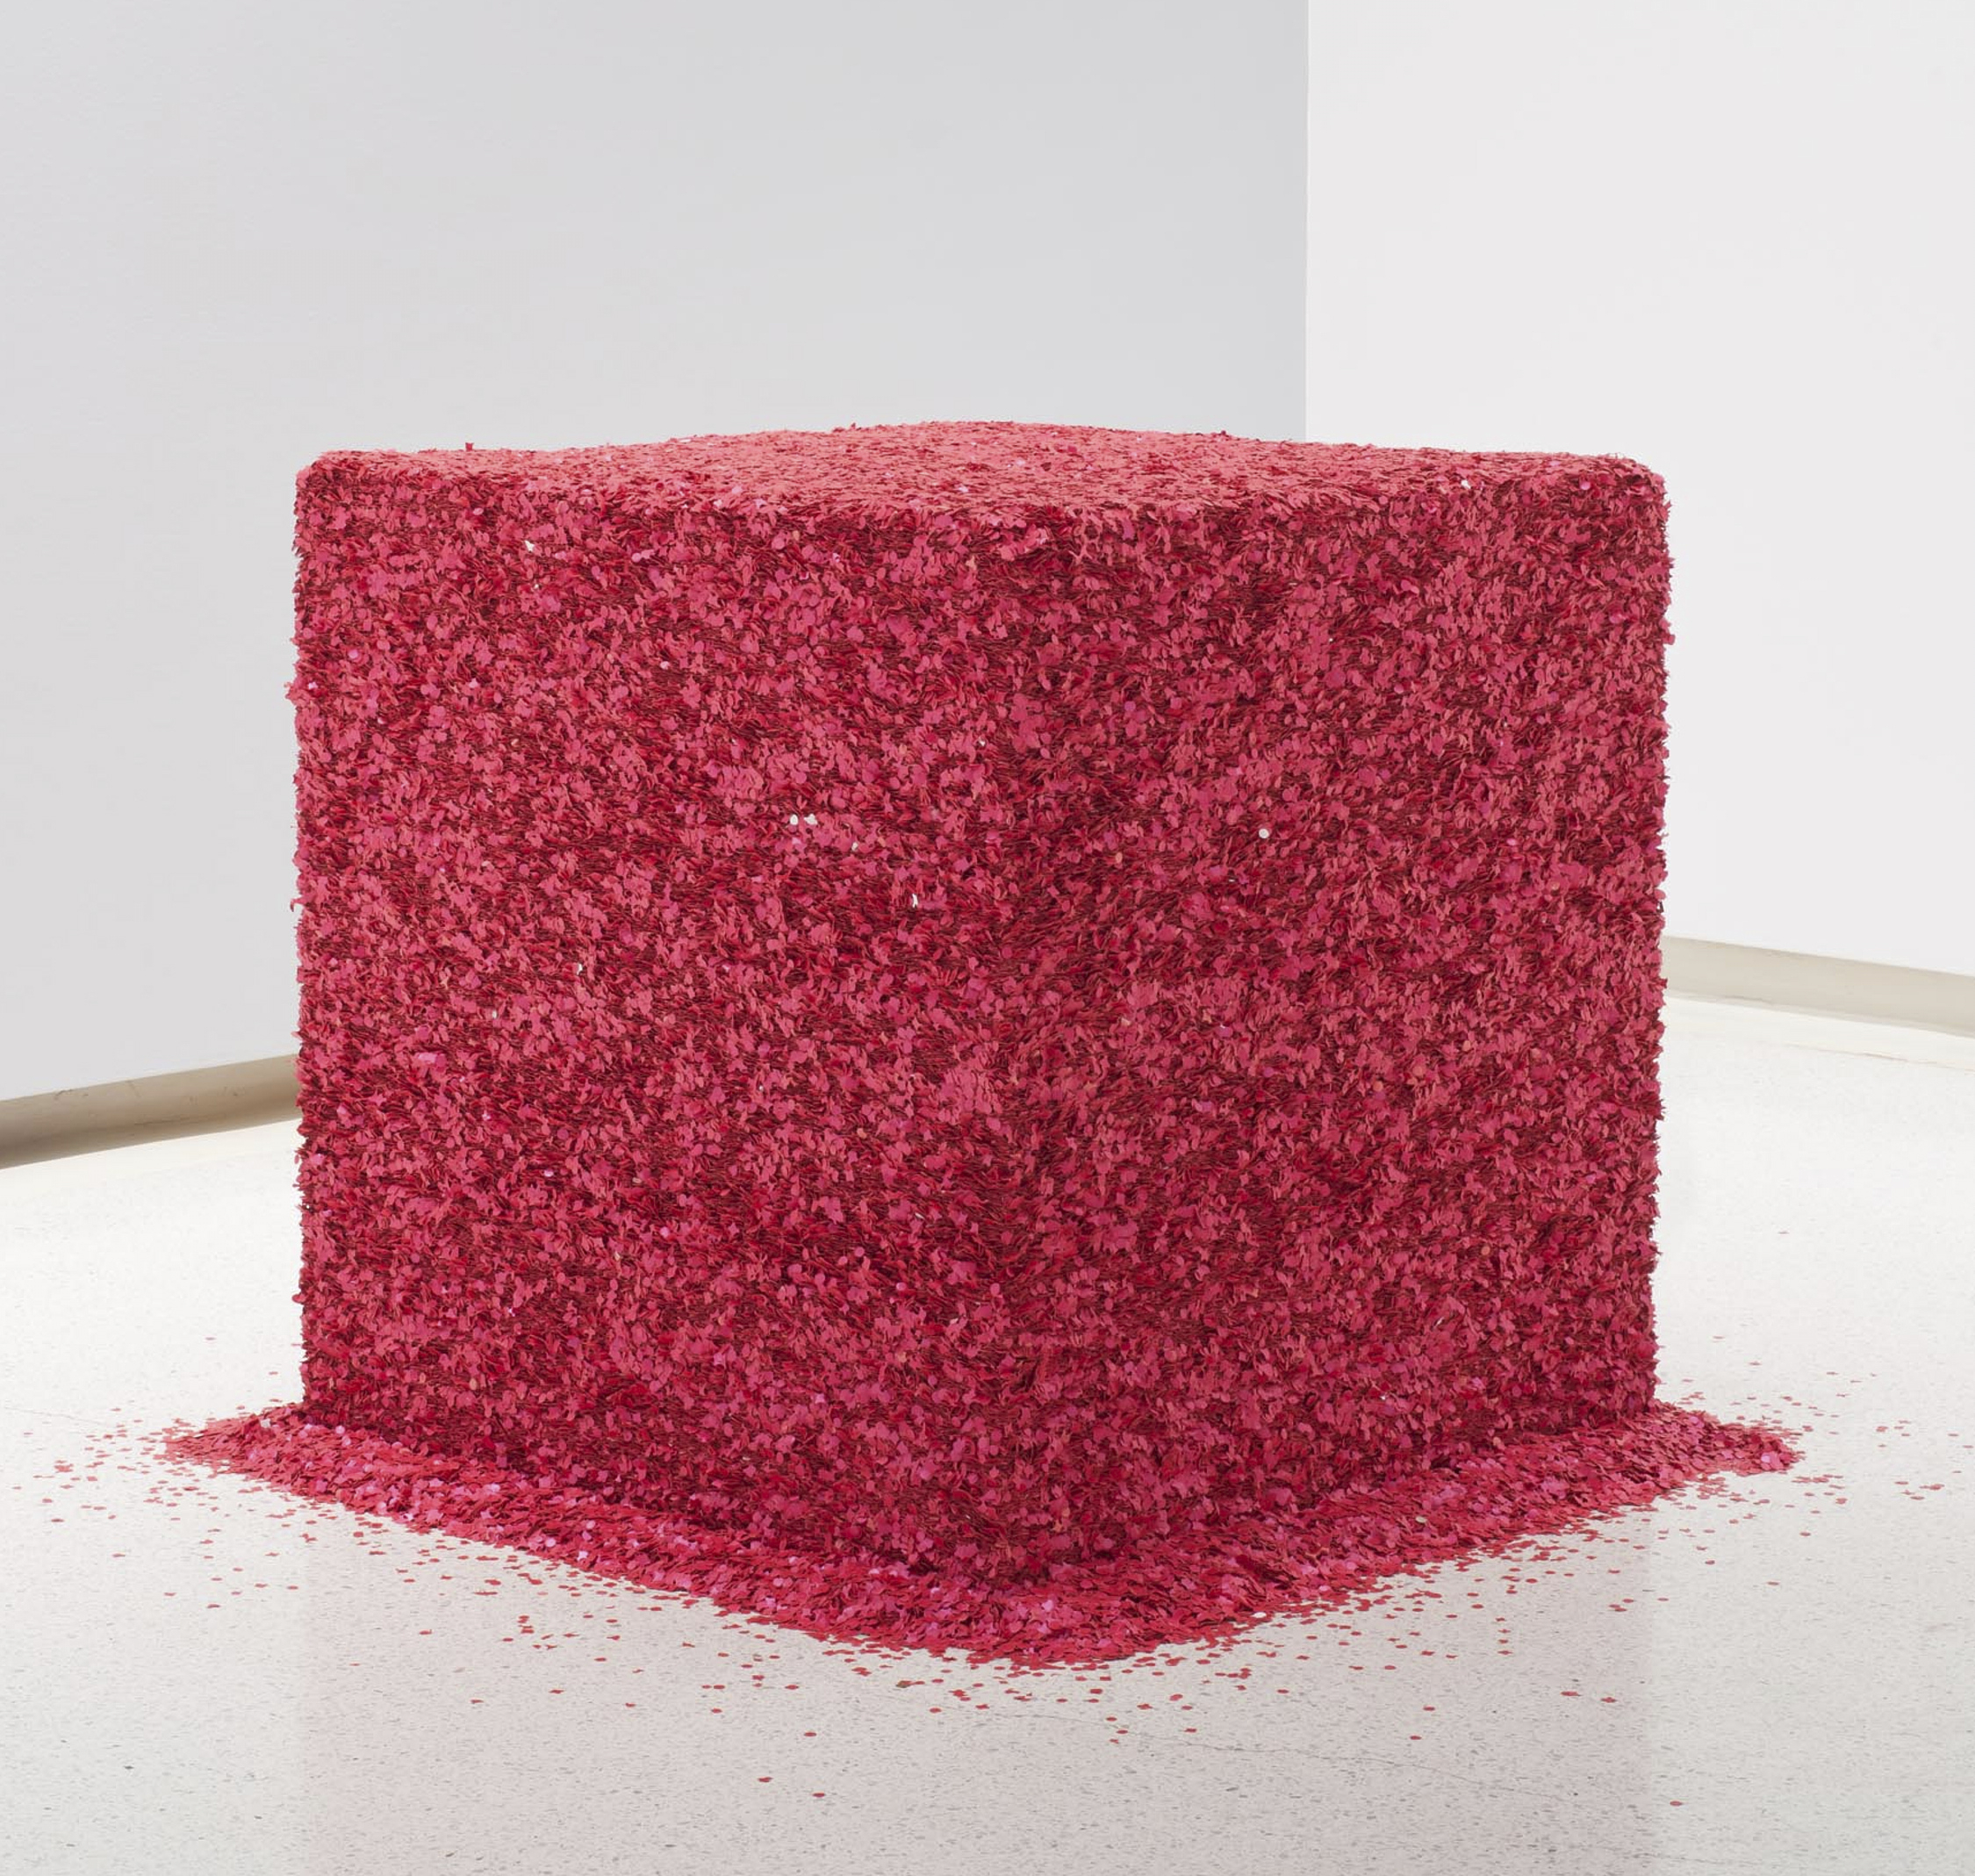 A red fuzzy block apart of the 2013 Carnegie International